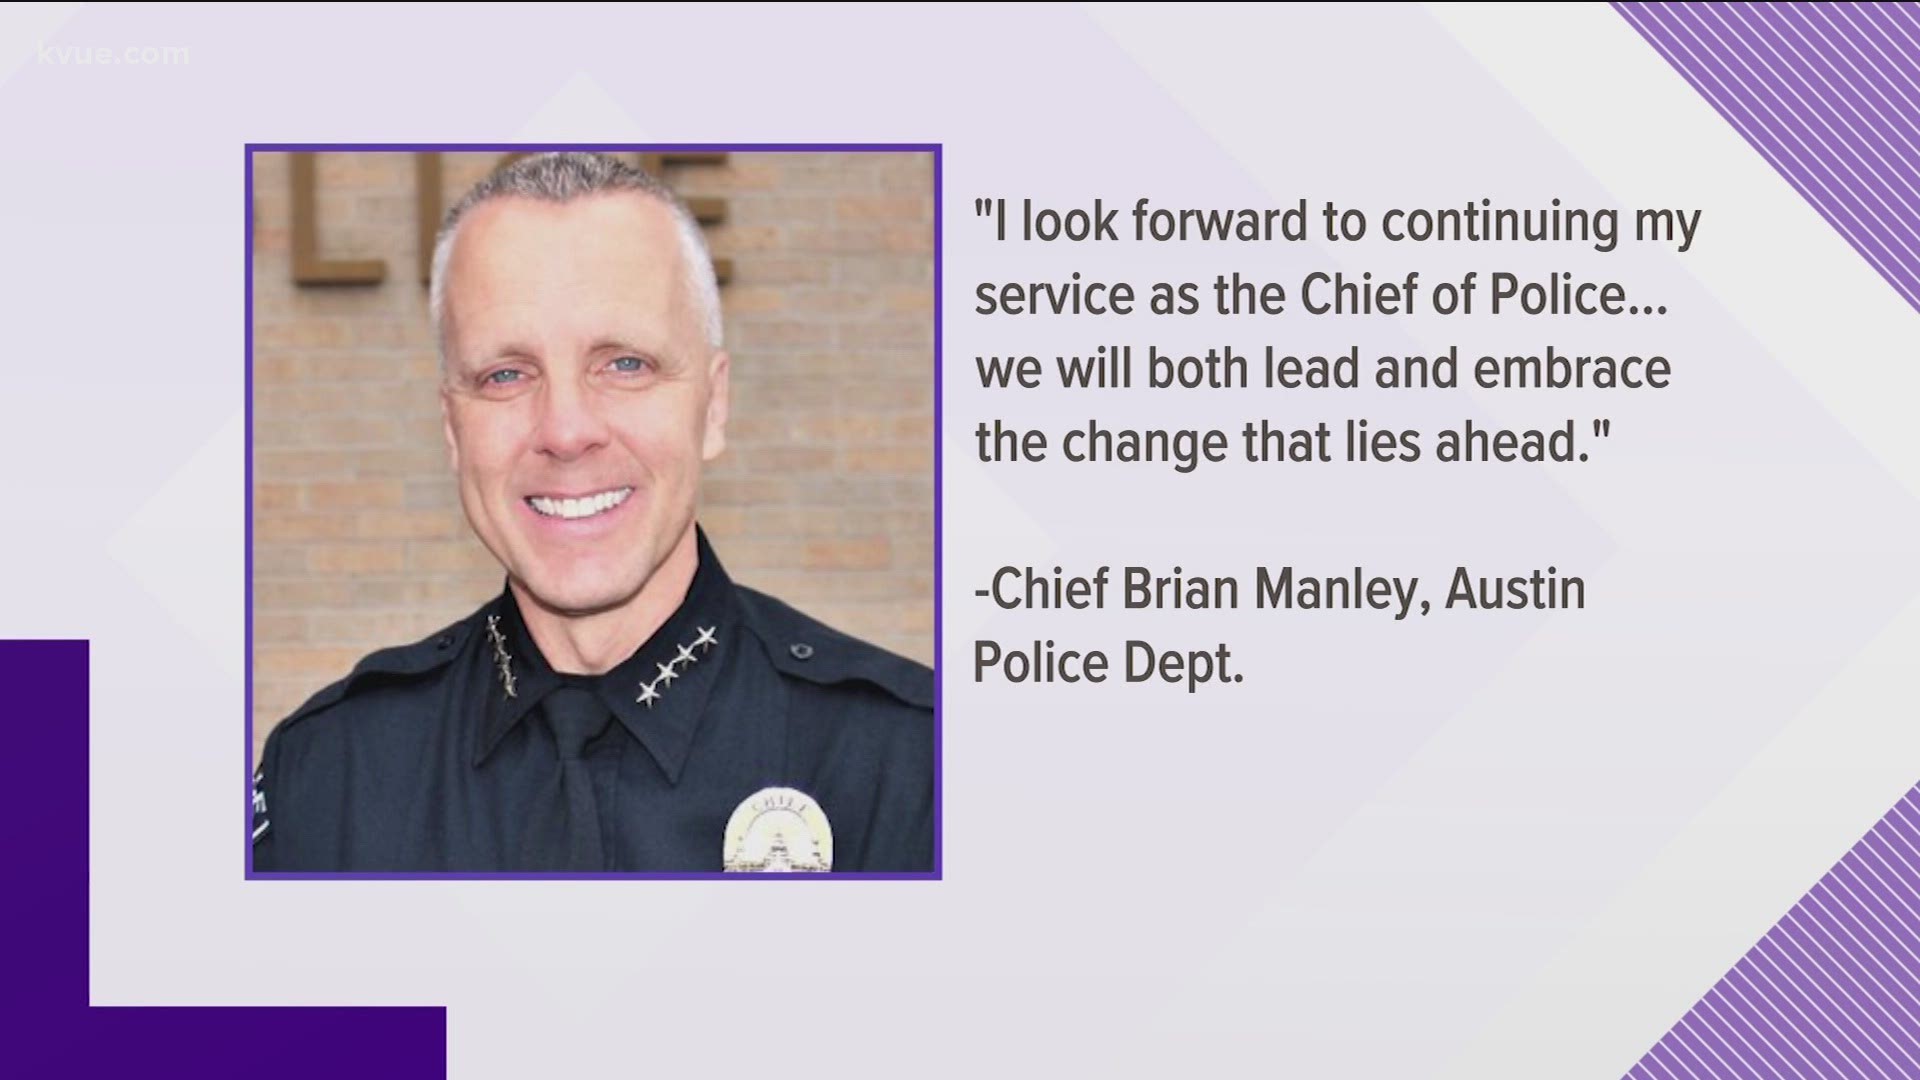 It looks like Austin Police Chief Brian Manley will keep his job.